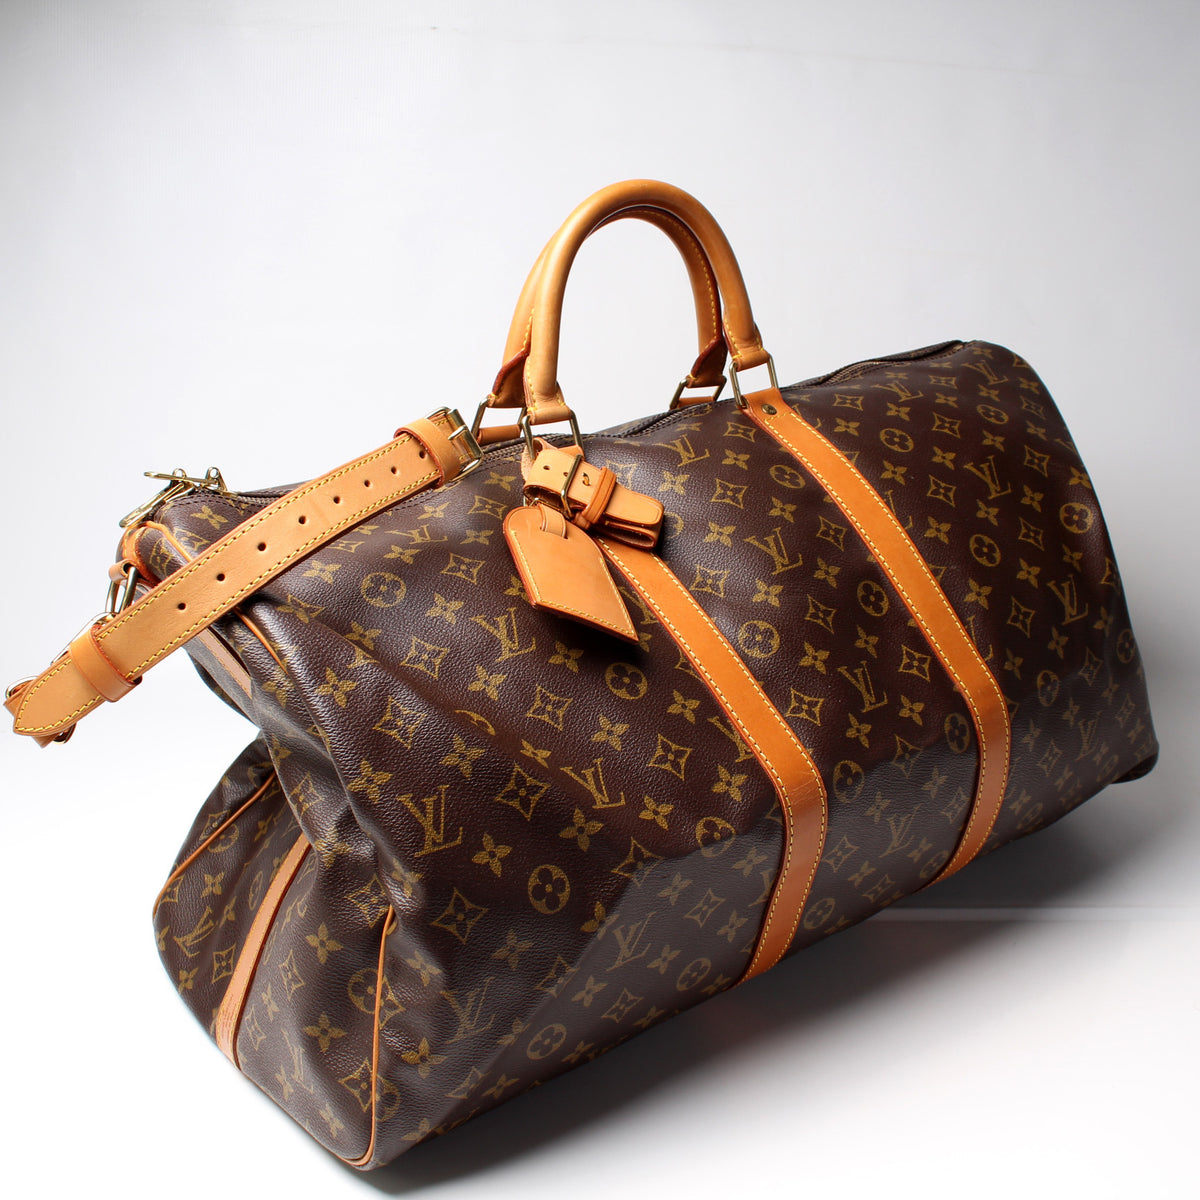 Real Vs Fake what are the 10 differences between these 2 Louis Vuitton  Keepall 45 monogram bag 